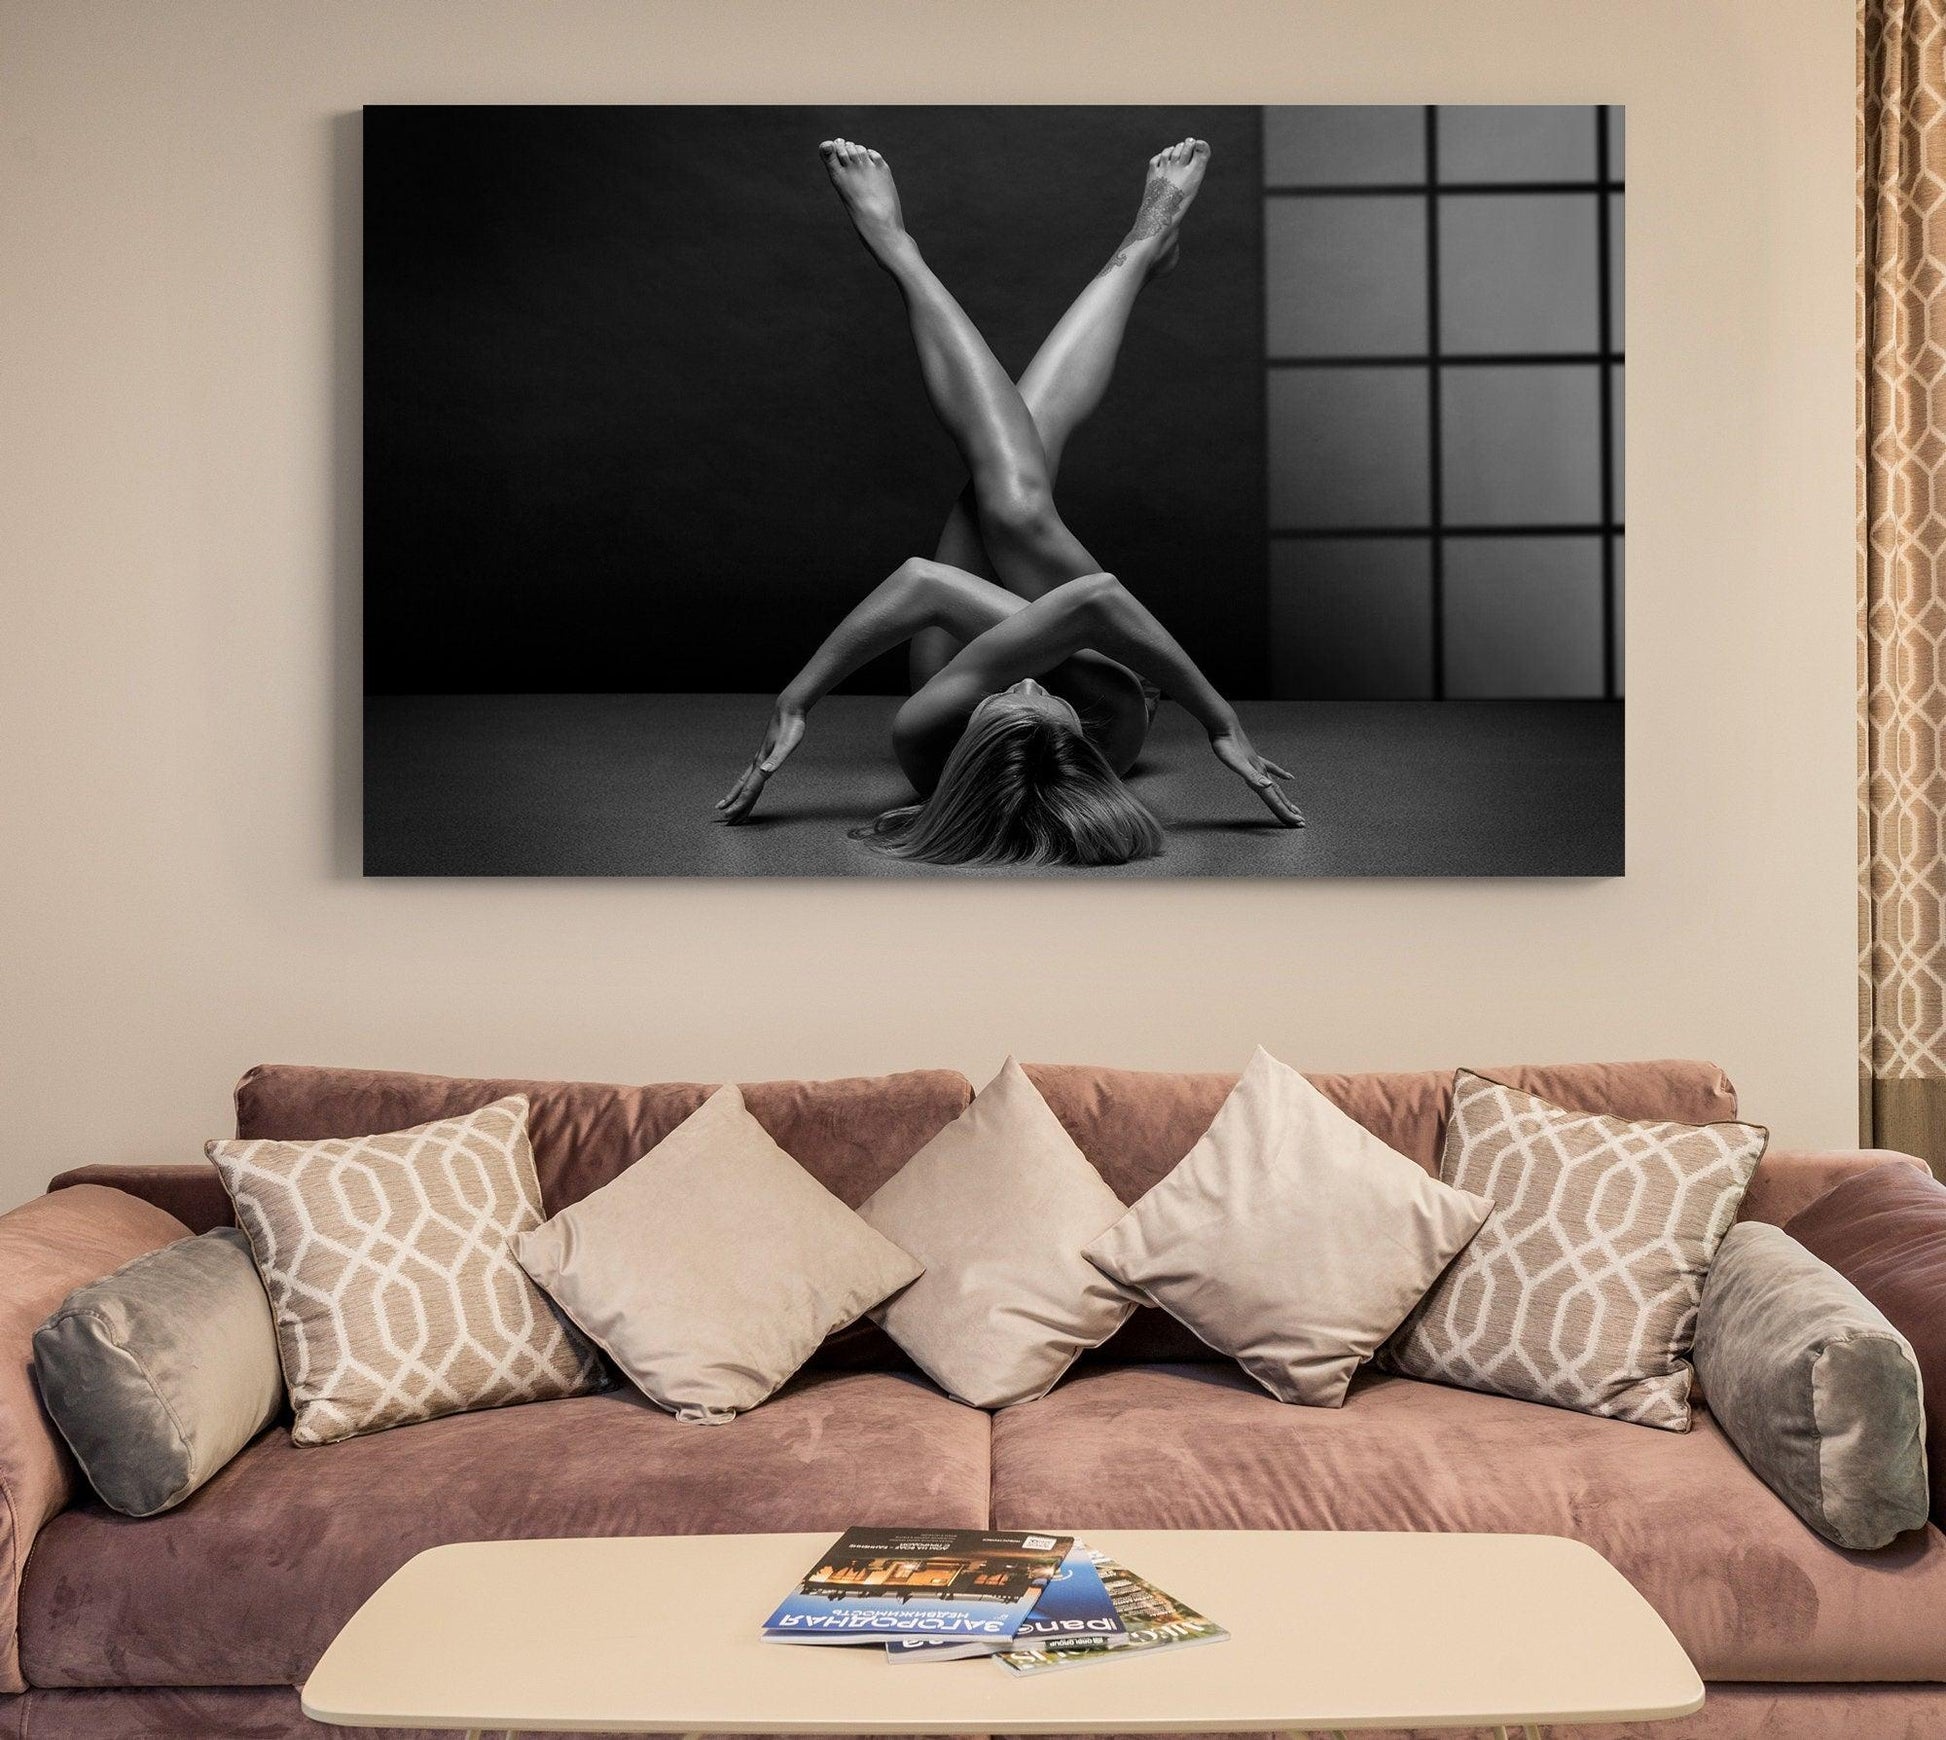 Nude Photography Tempered Glass Wall Art | Christmas Gift, glass wall art modern, gift for her, nuded girl uncensored, female nudes photos